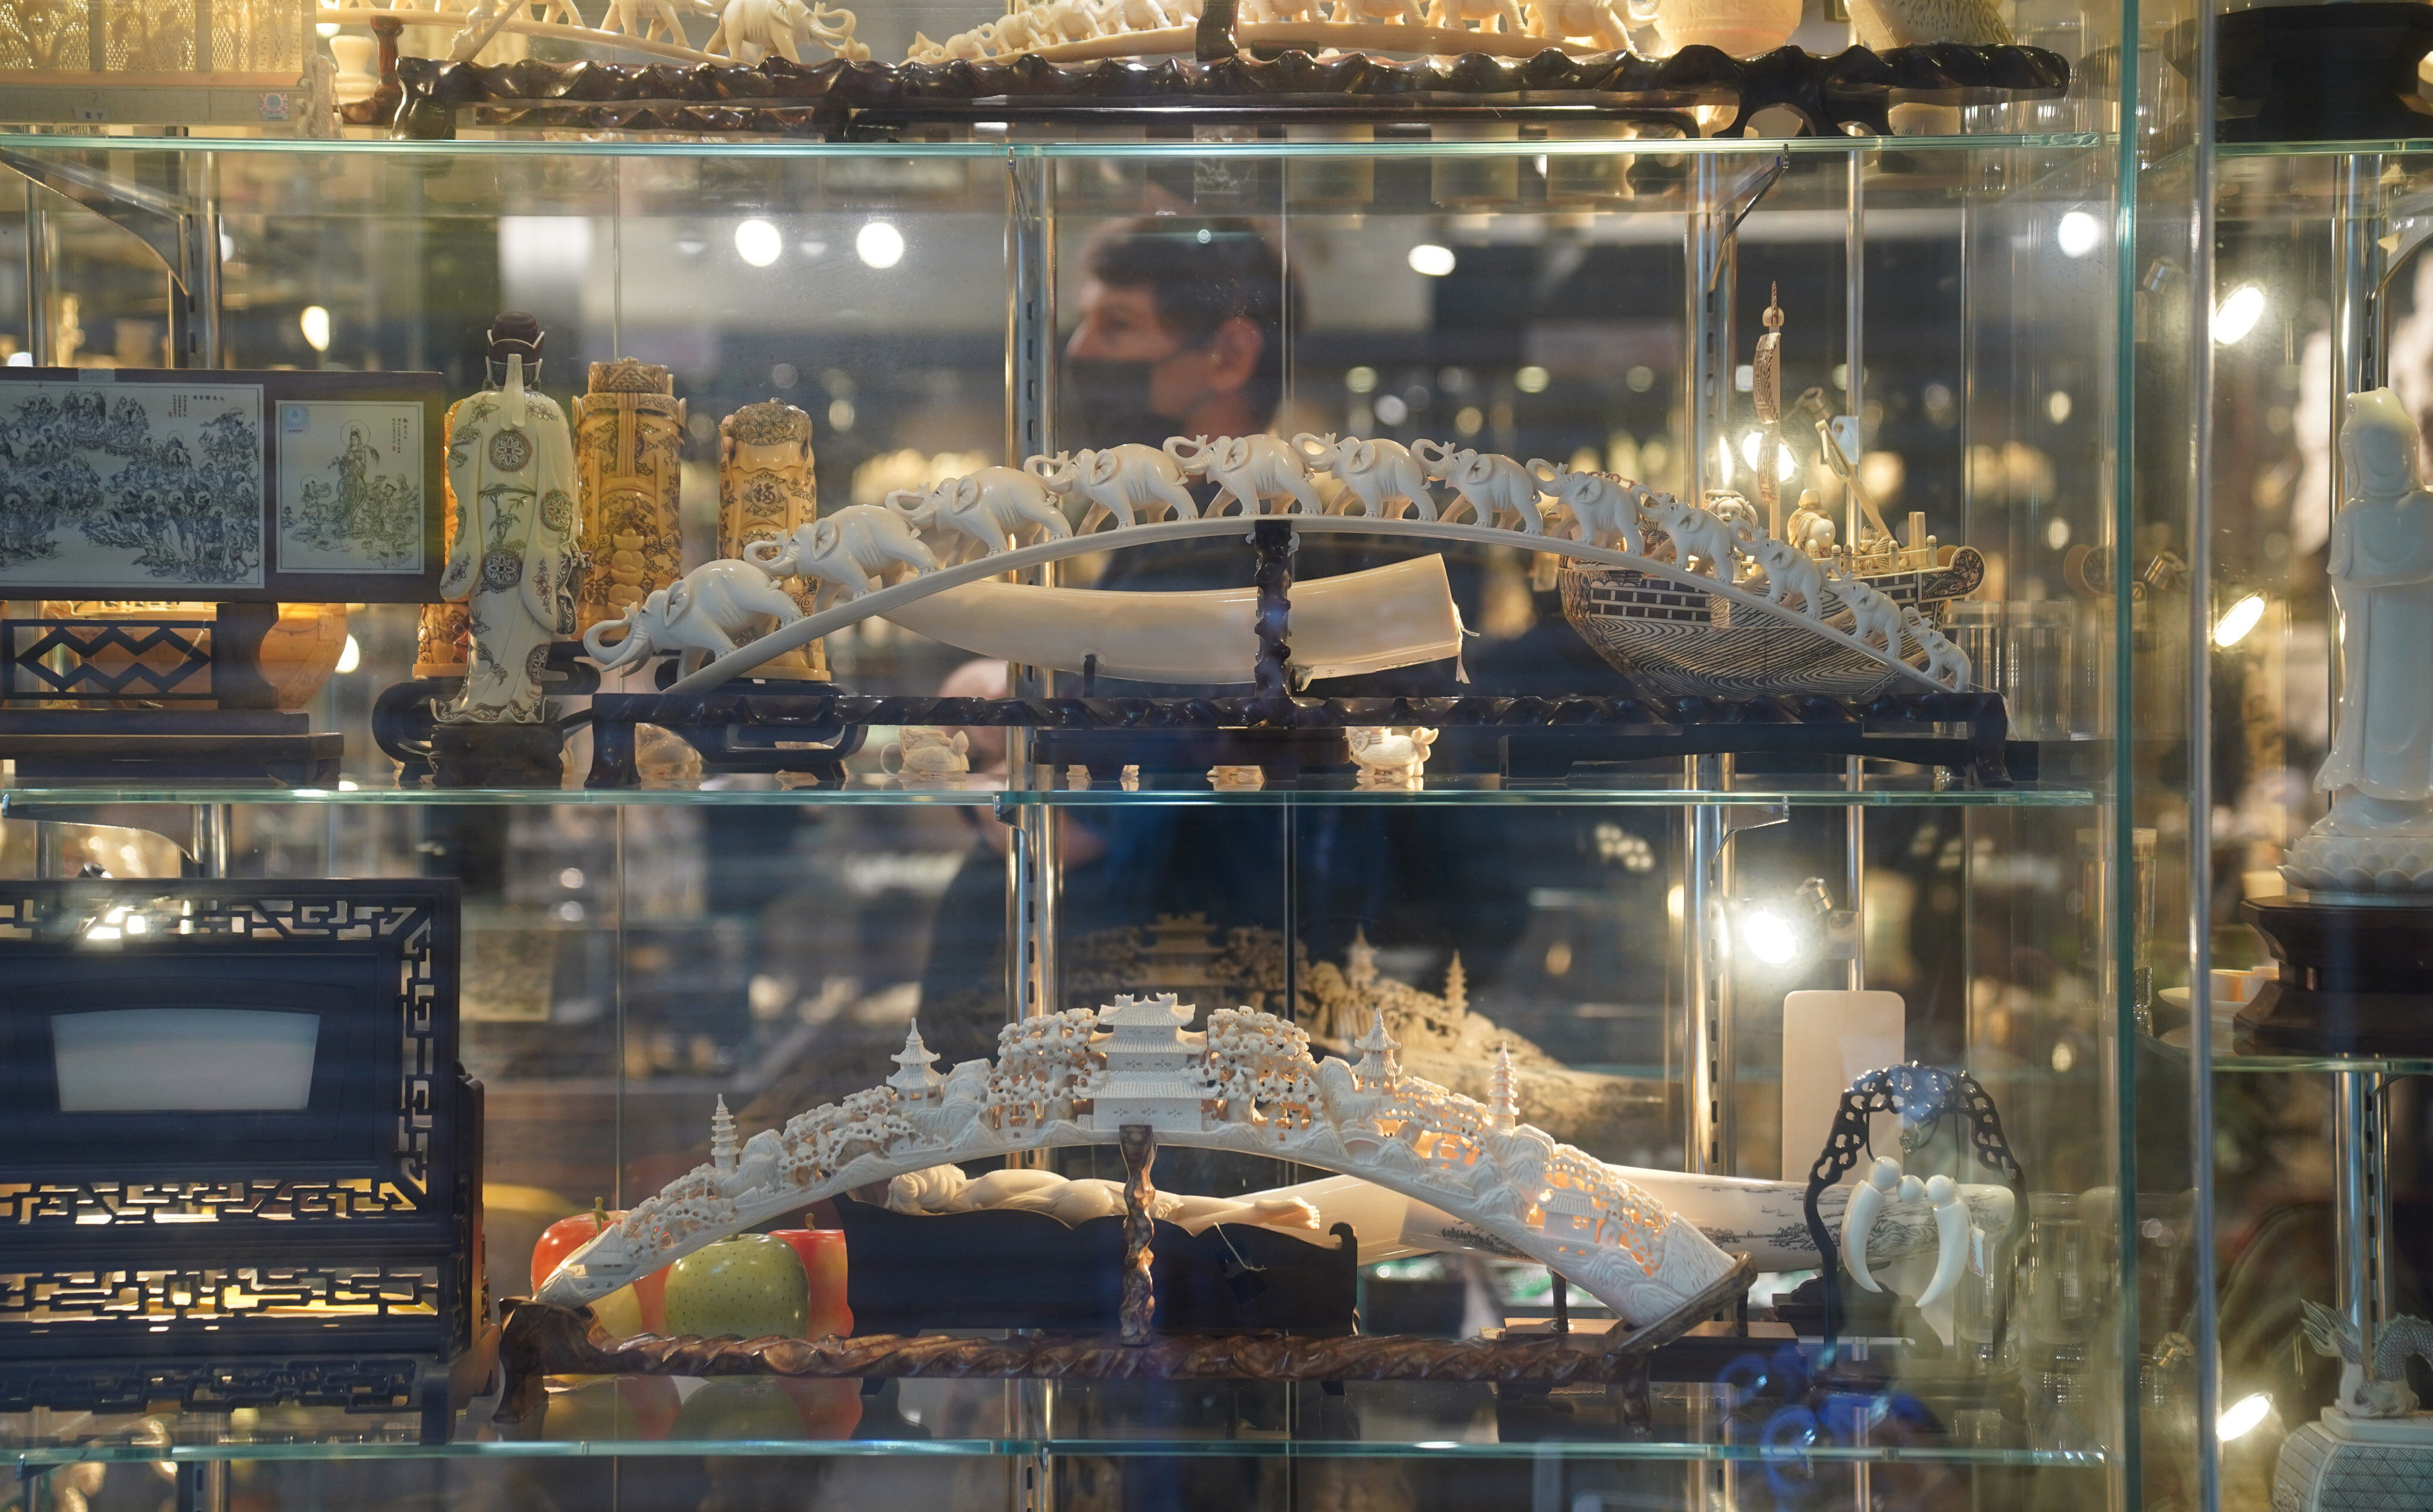 Ivory is displayed in a shop in Sheung Wan on January 2. For most people, it is impossible to distinguish antique ivory from illegal elephant ivory. Photo: Sam Tsang